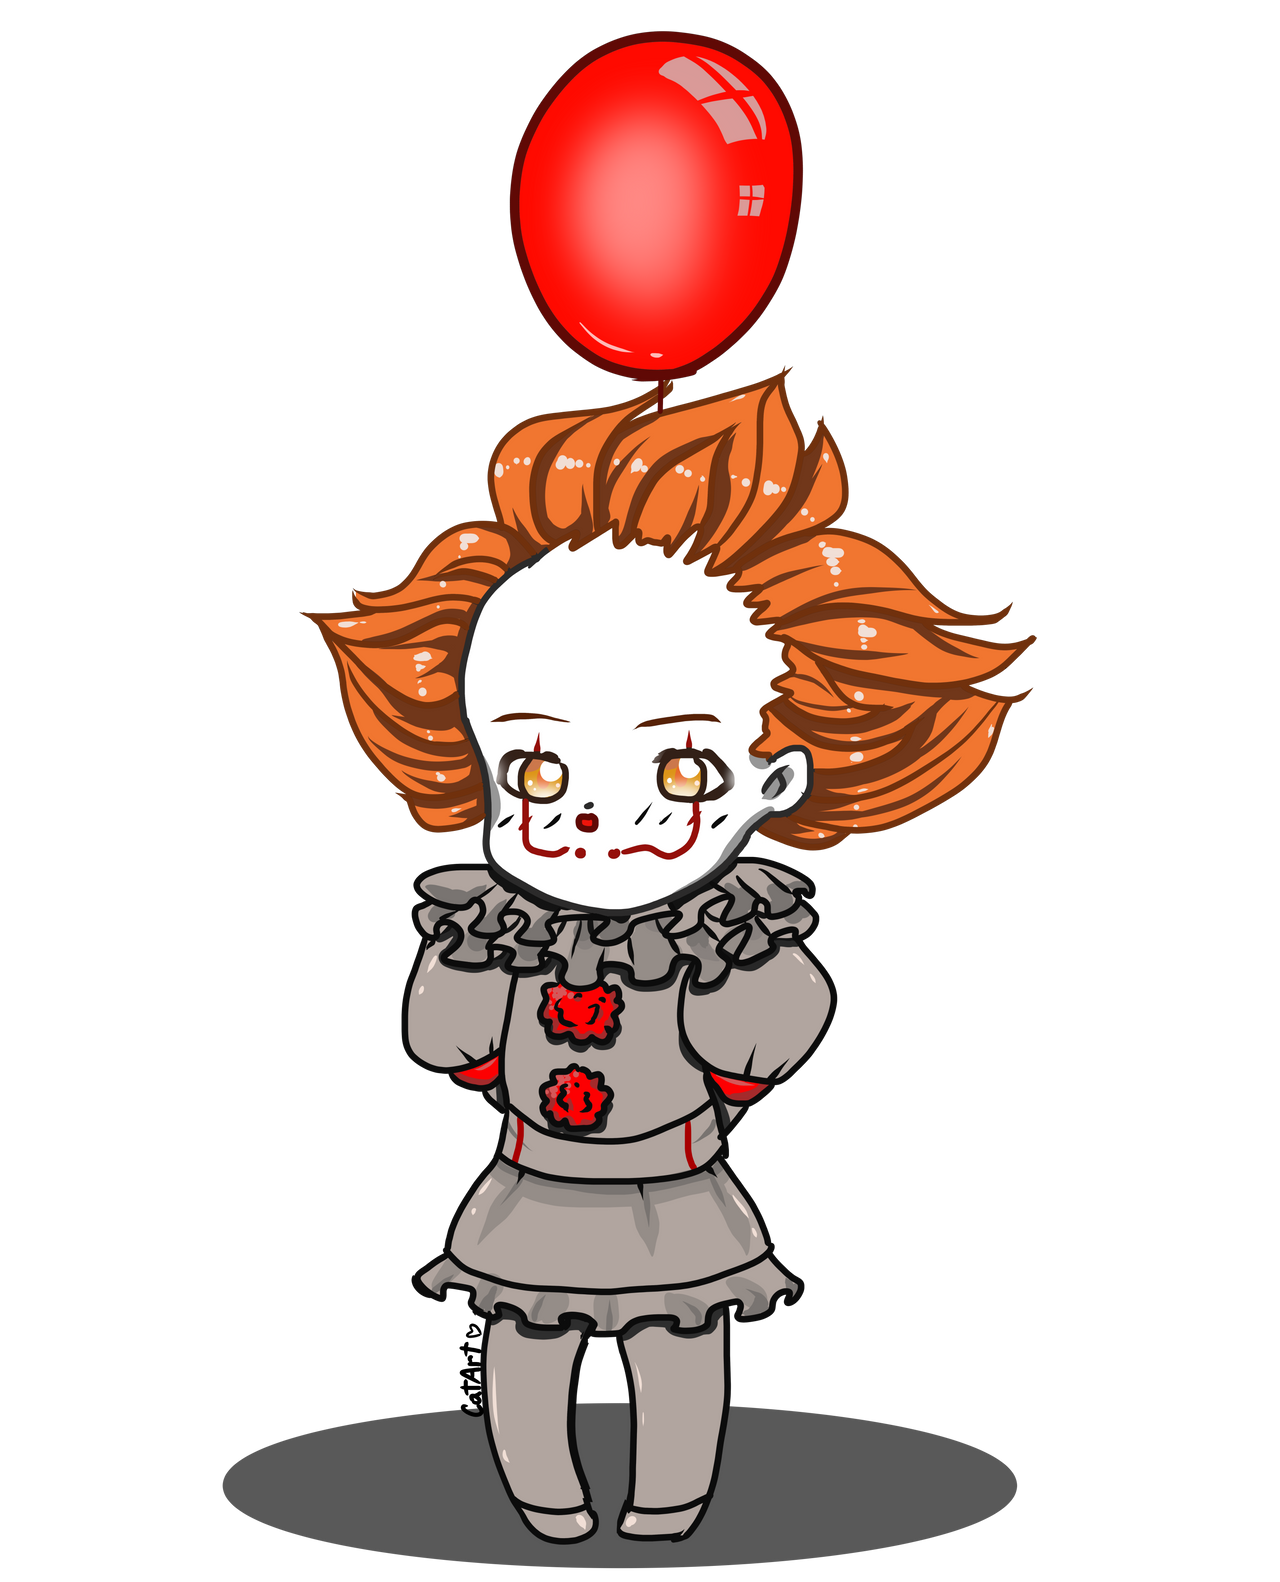 Cute Baby Pennywise Drawings